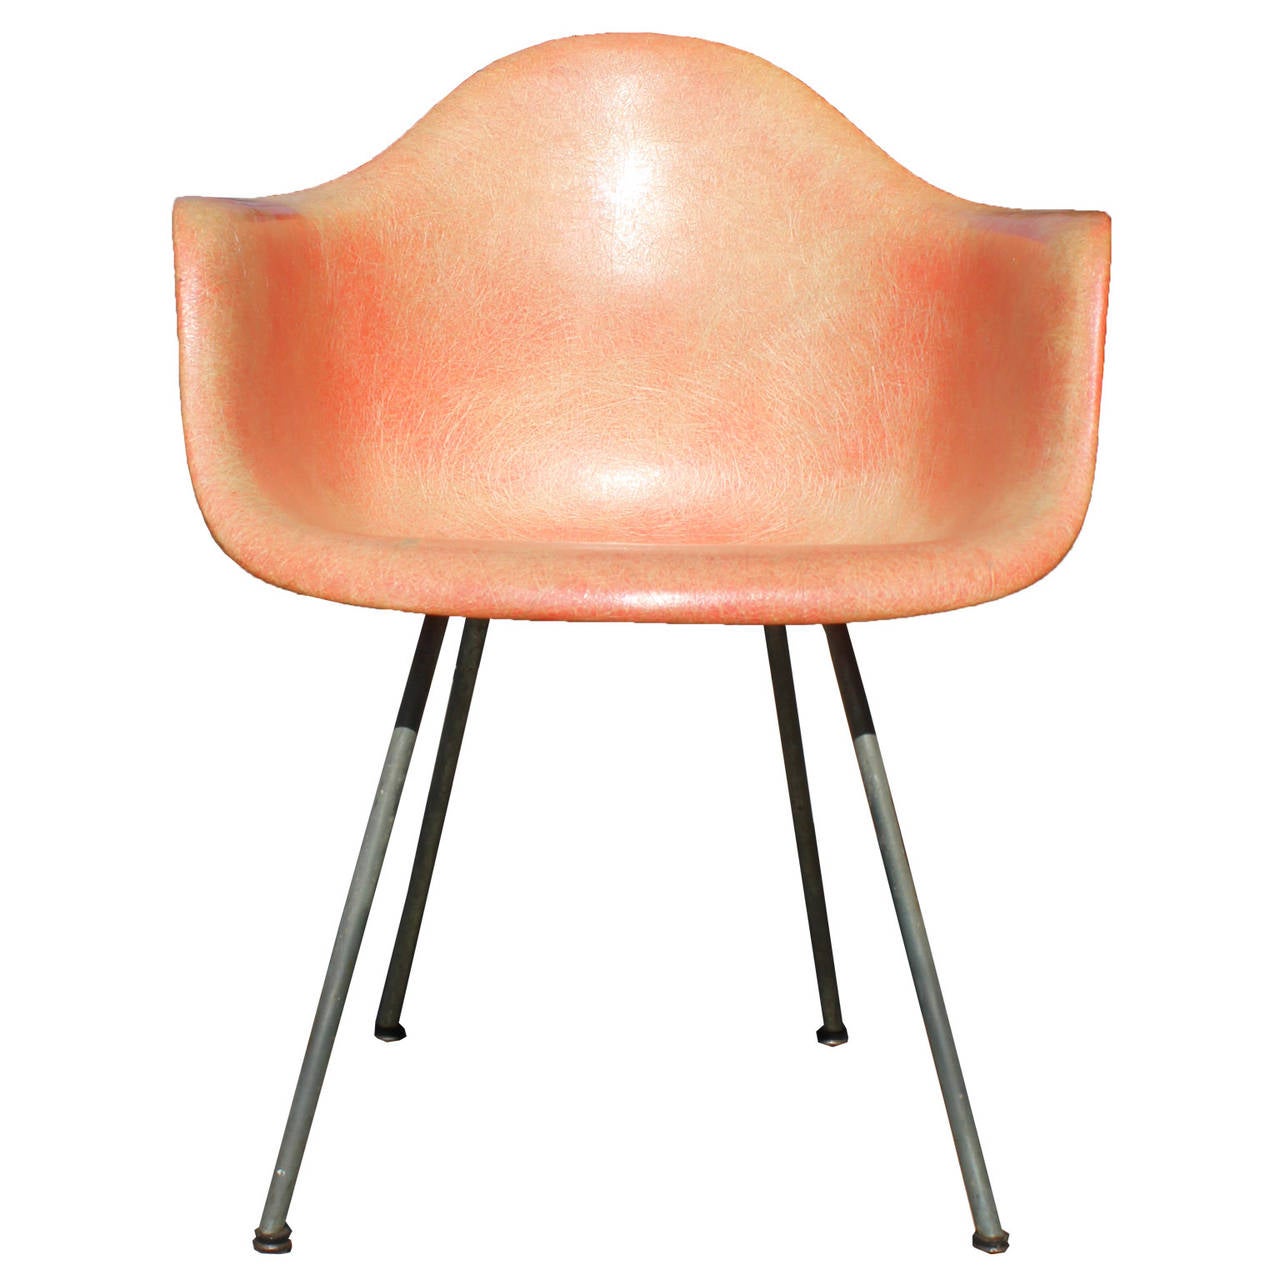 A fiberglass Zenith chair designed by Eames for Herman Miller in a salmon color with rare rope edge detail. The chair retains the original label and is in all original condition. Light fading consistent with age.